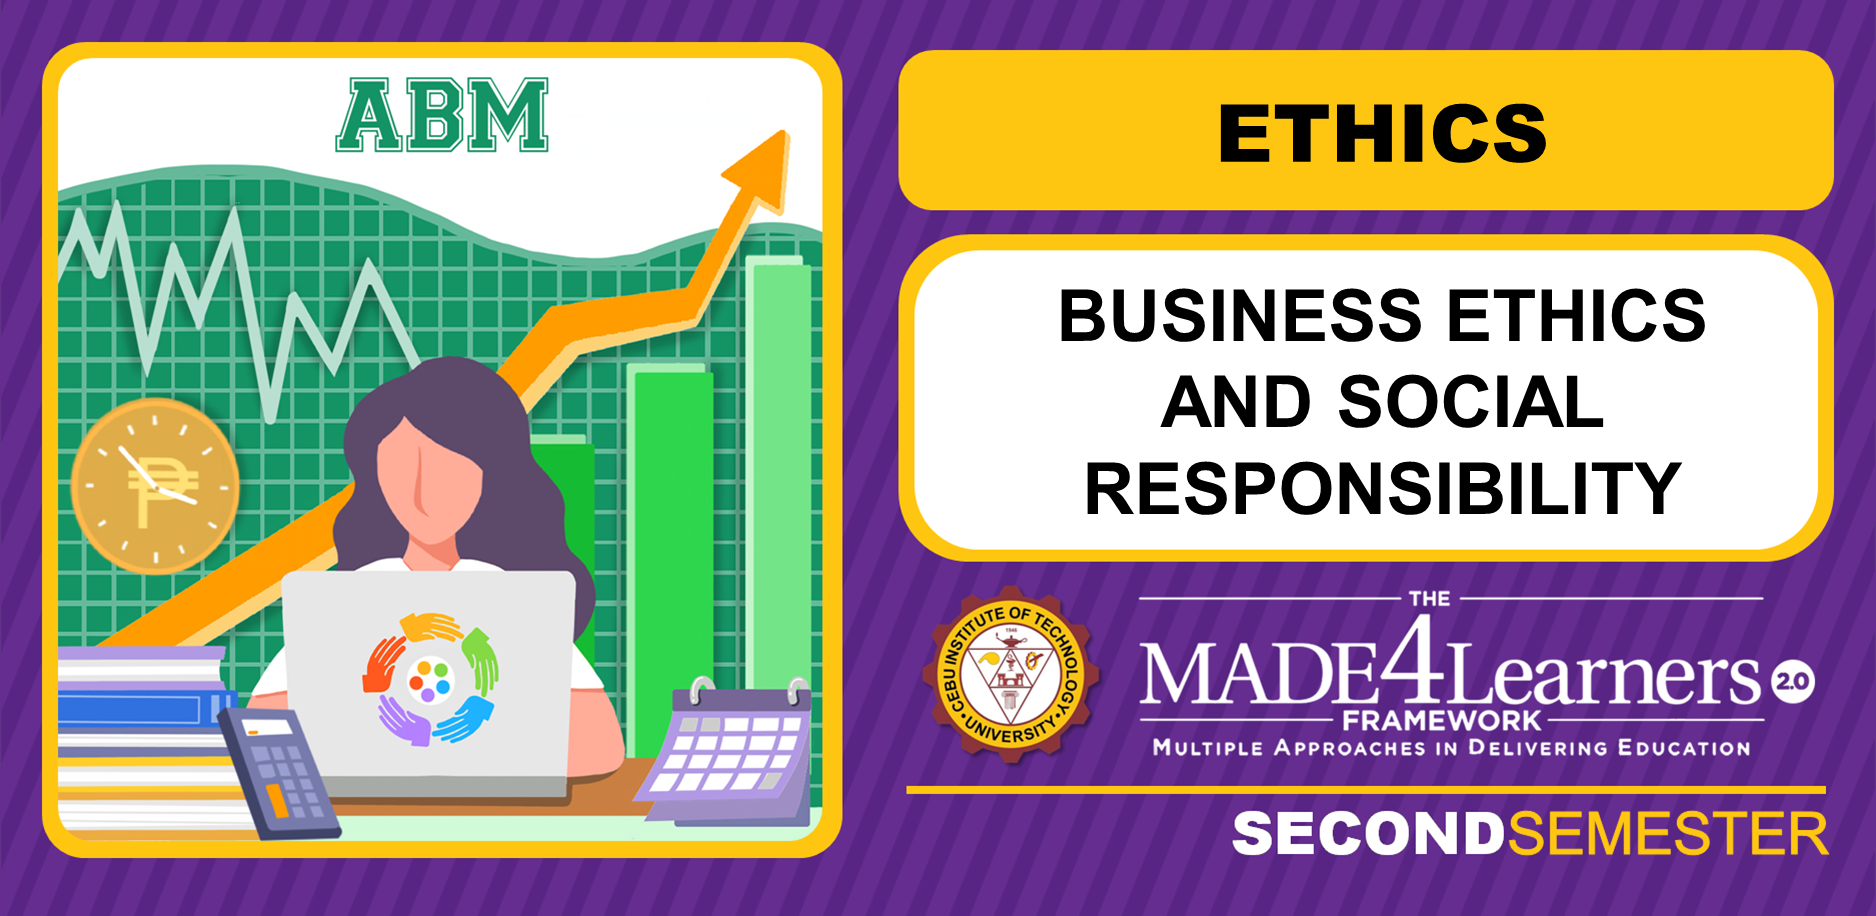 ETHICS: Business Ethics and Social Responsibility (Abella)